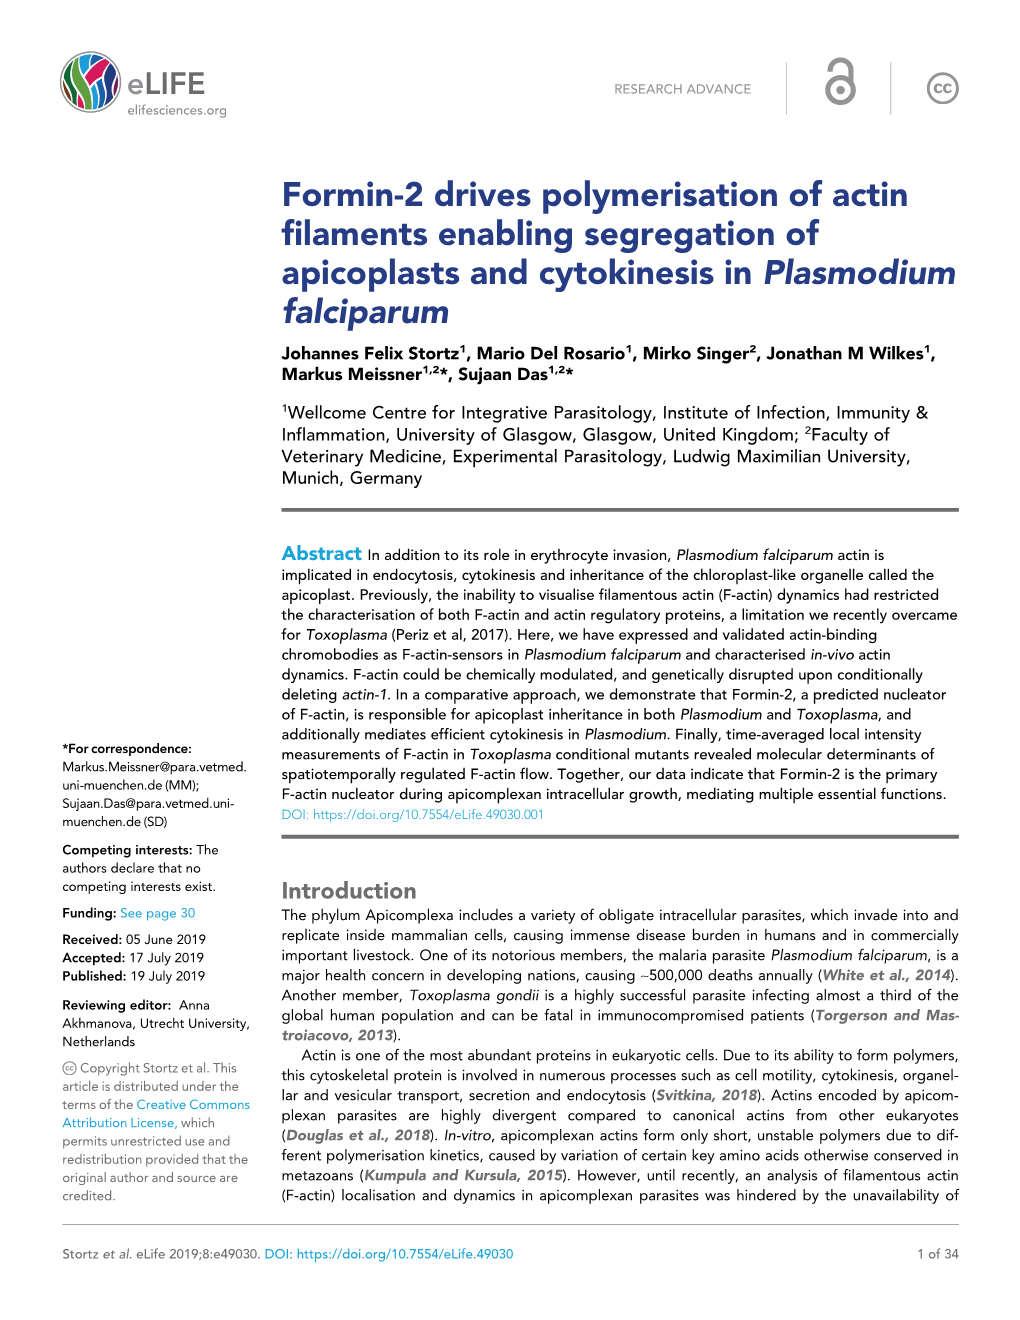 Formin-2 Drives Polymerisation of Actin Filaments Enabling